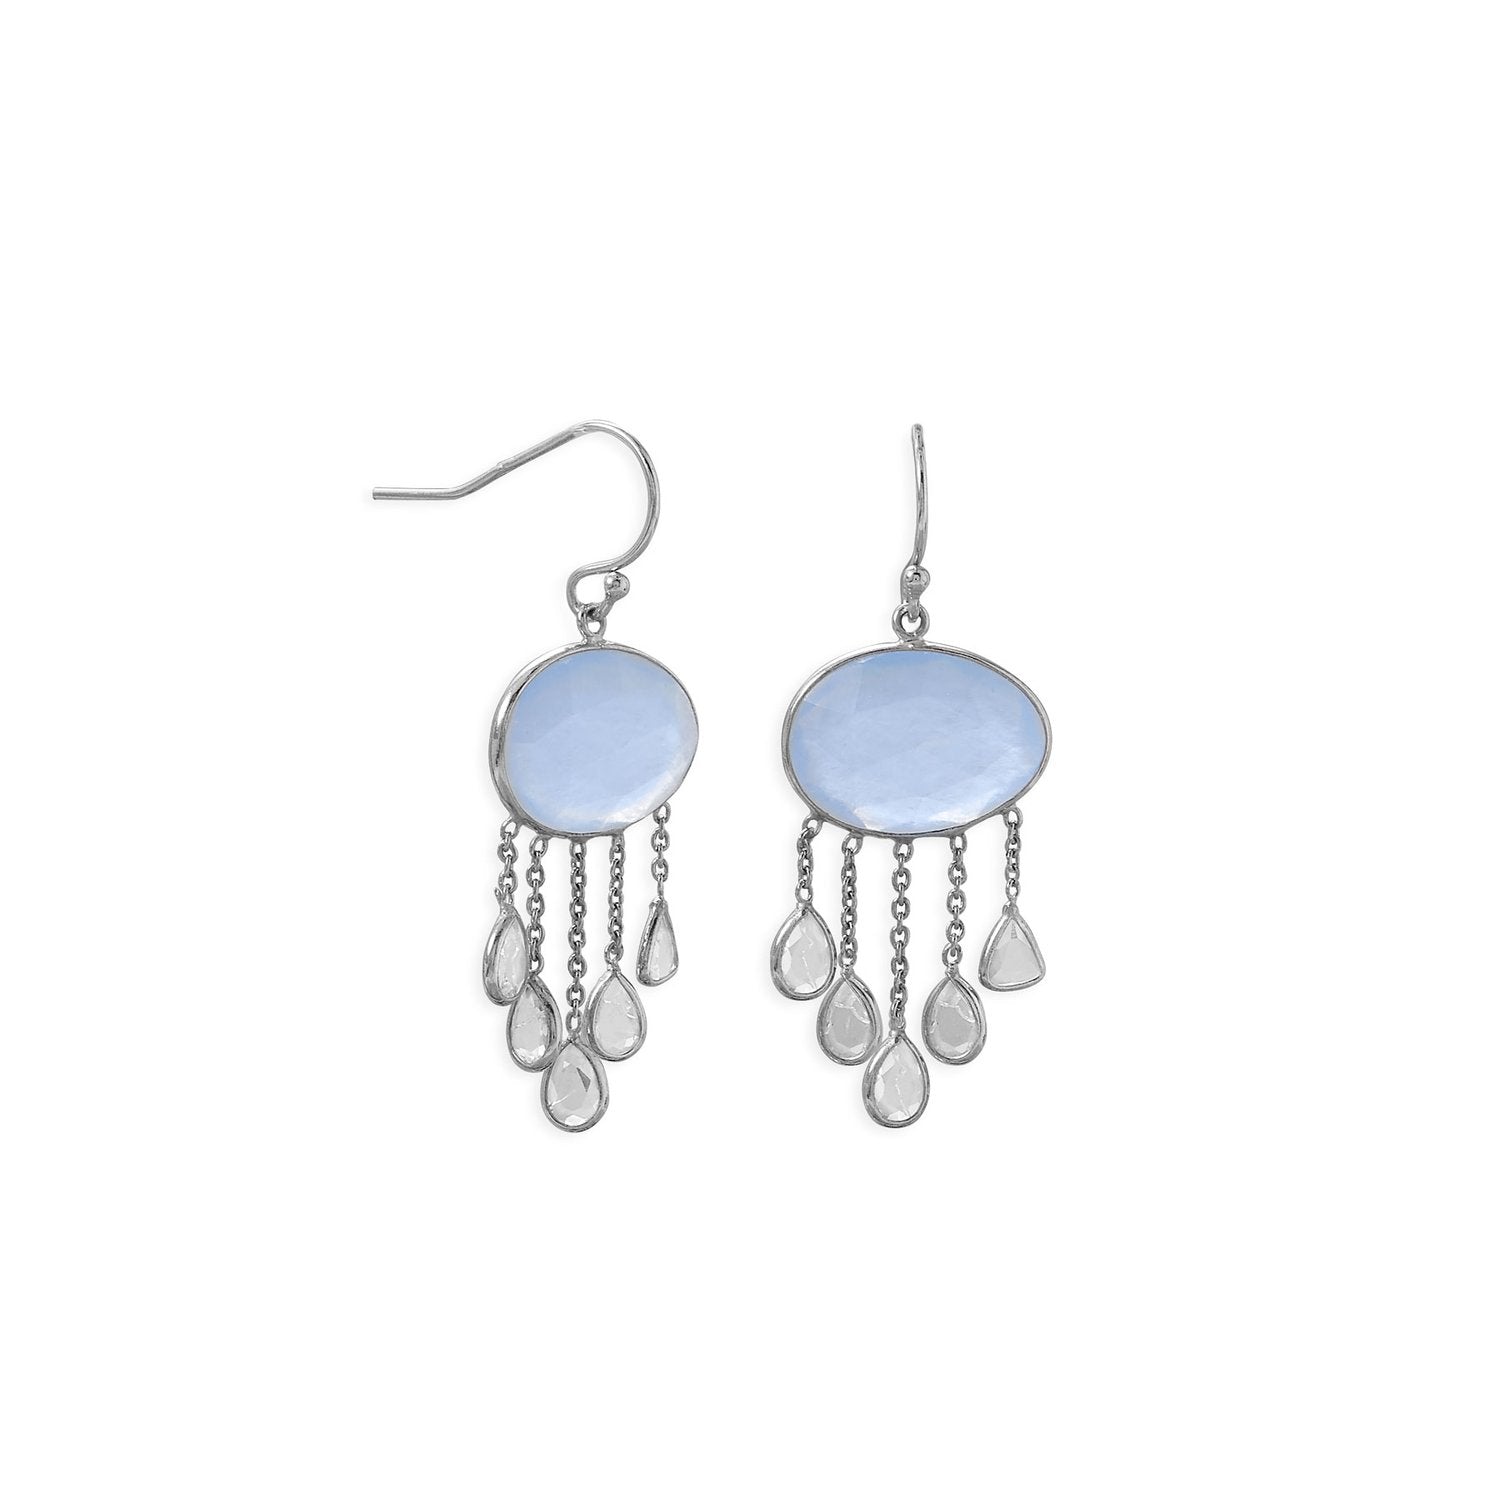 Rhodium Plated Chalcedony and White Quartz Drop Earring